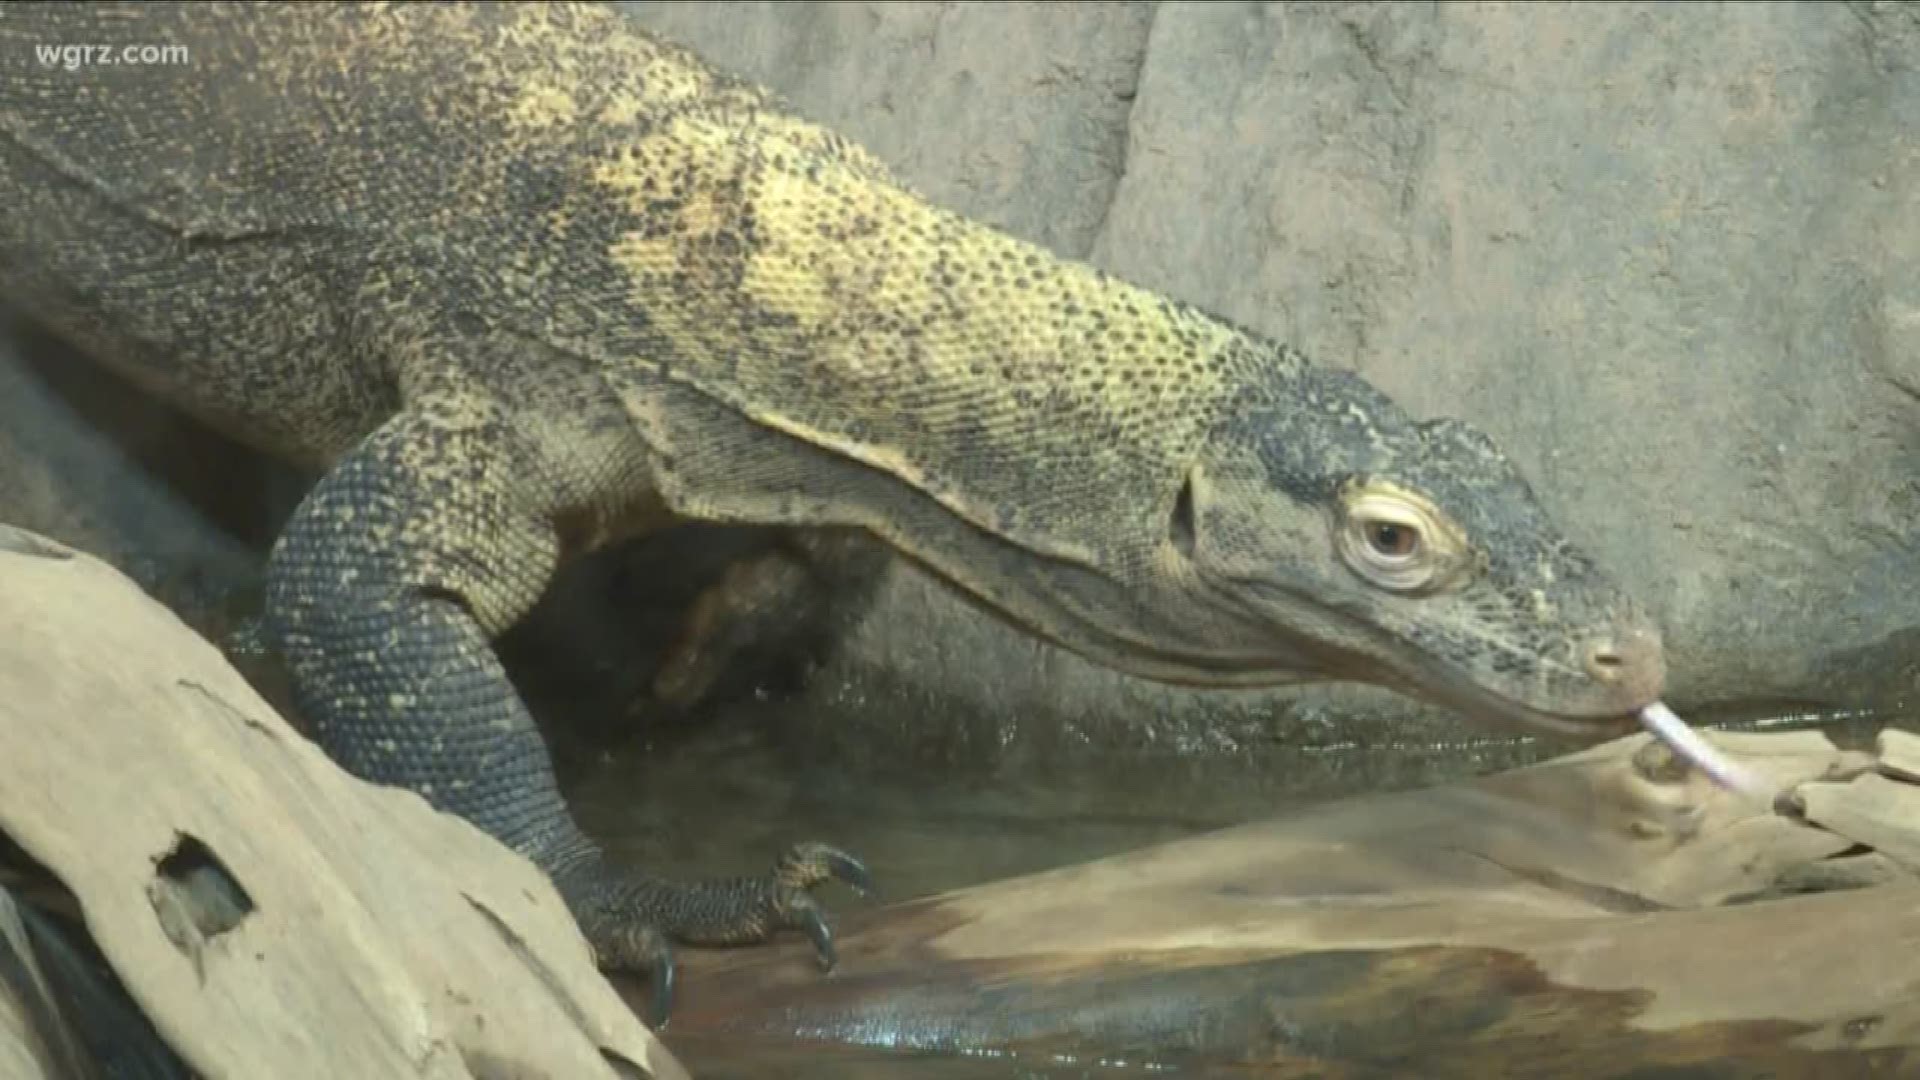 The Komodo dragon represents a connection to our prehistoric past, but they are threatened by human influence.